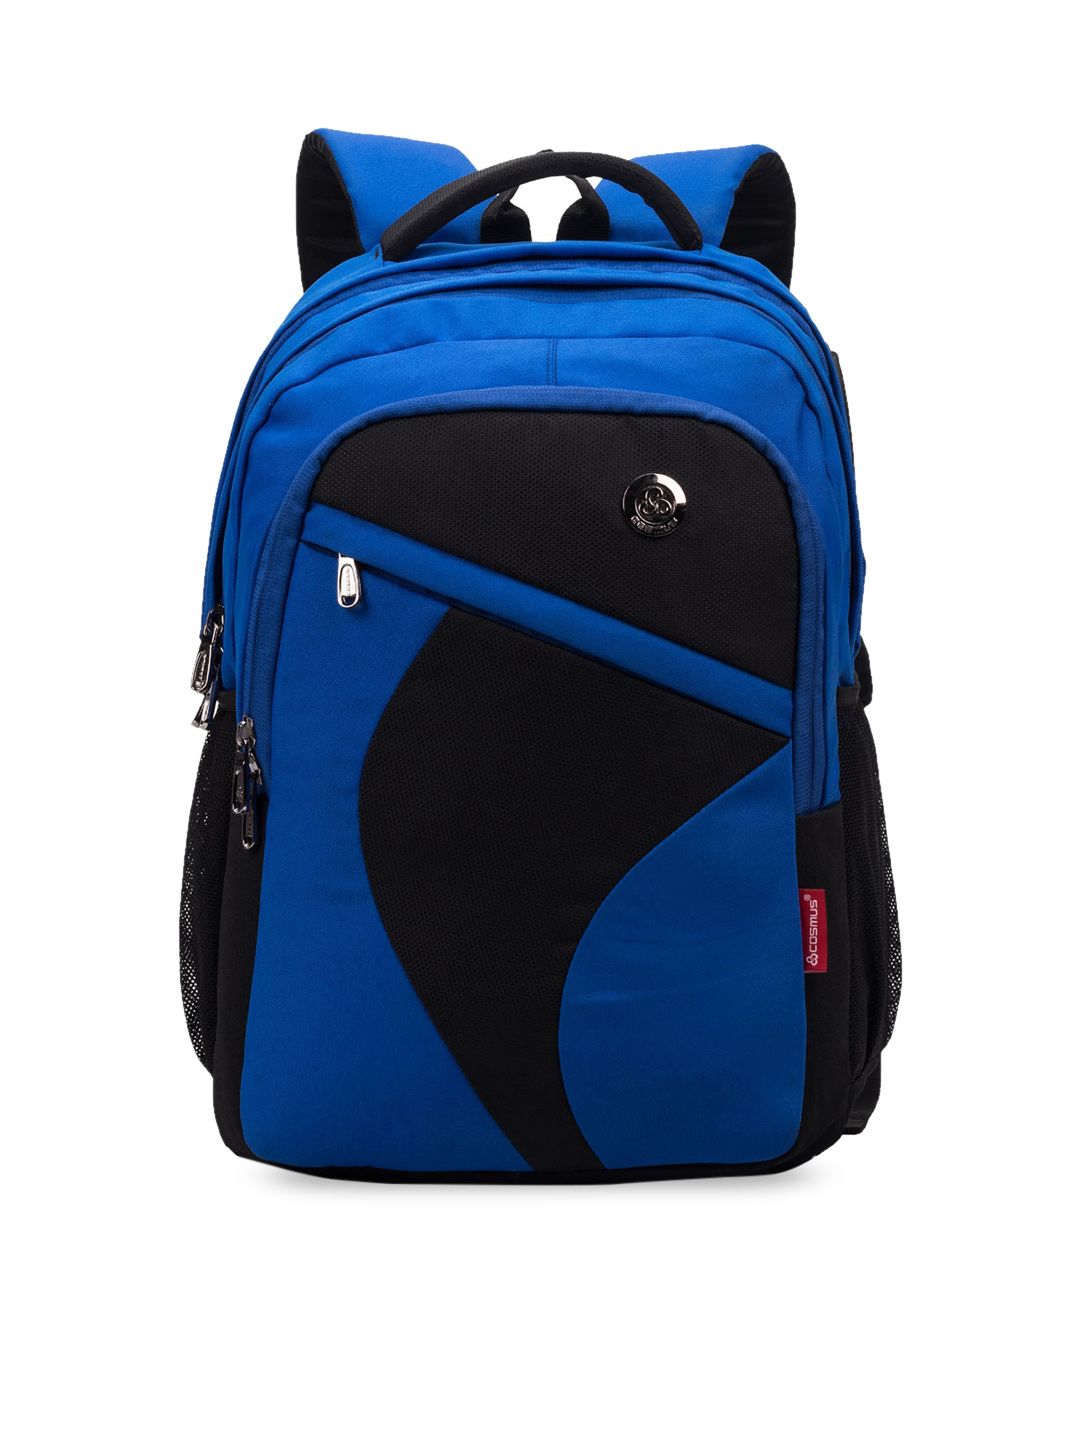 COSMUS Unisex Blue & Black Colourblocked Backpack Price in India